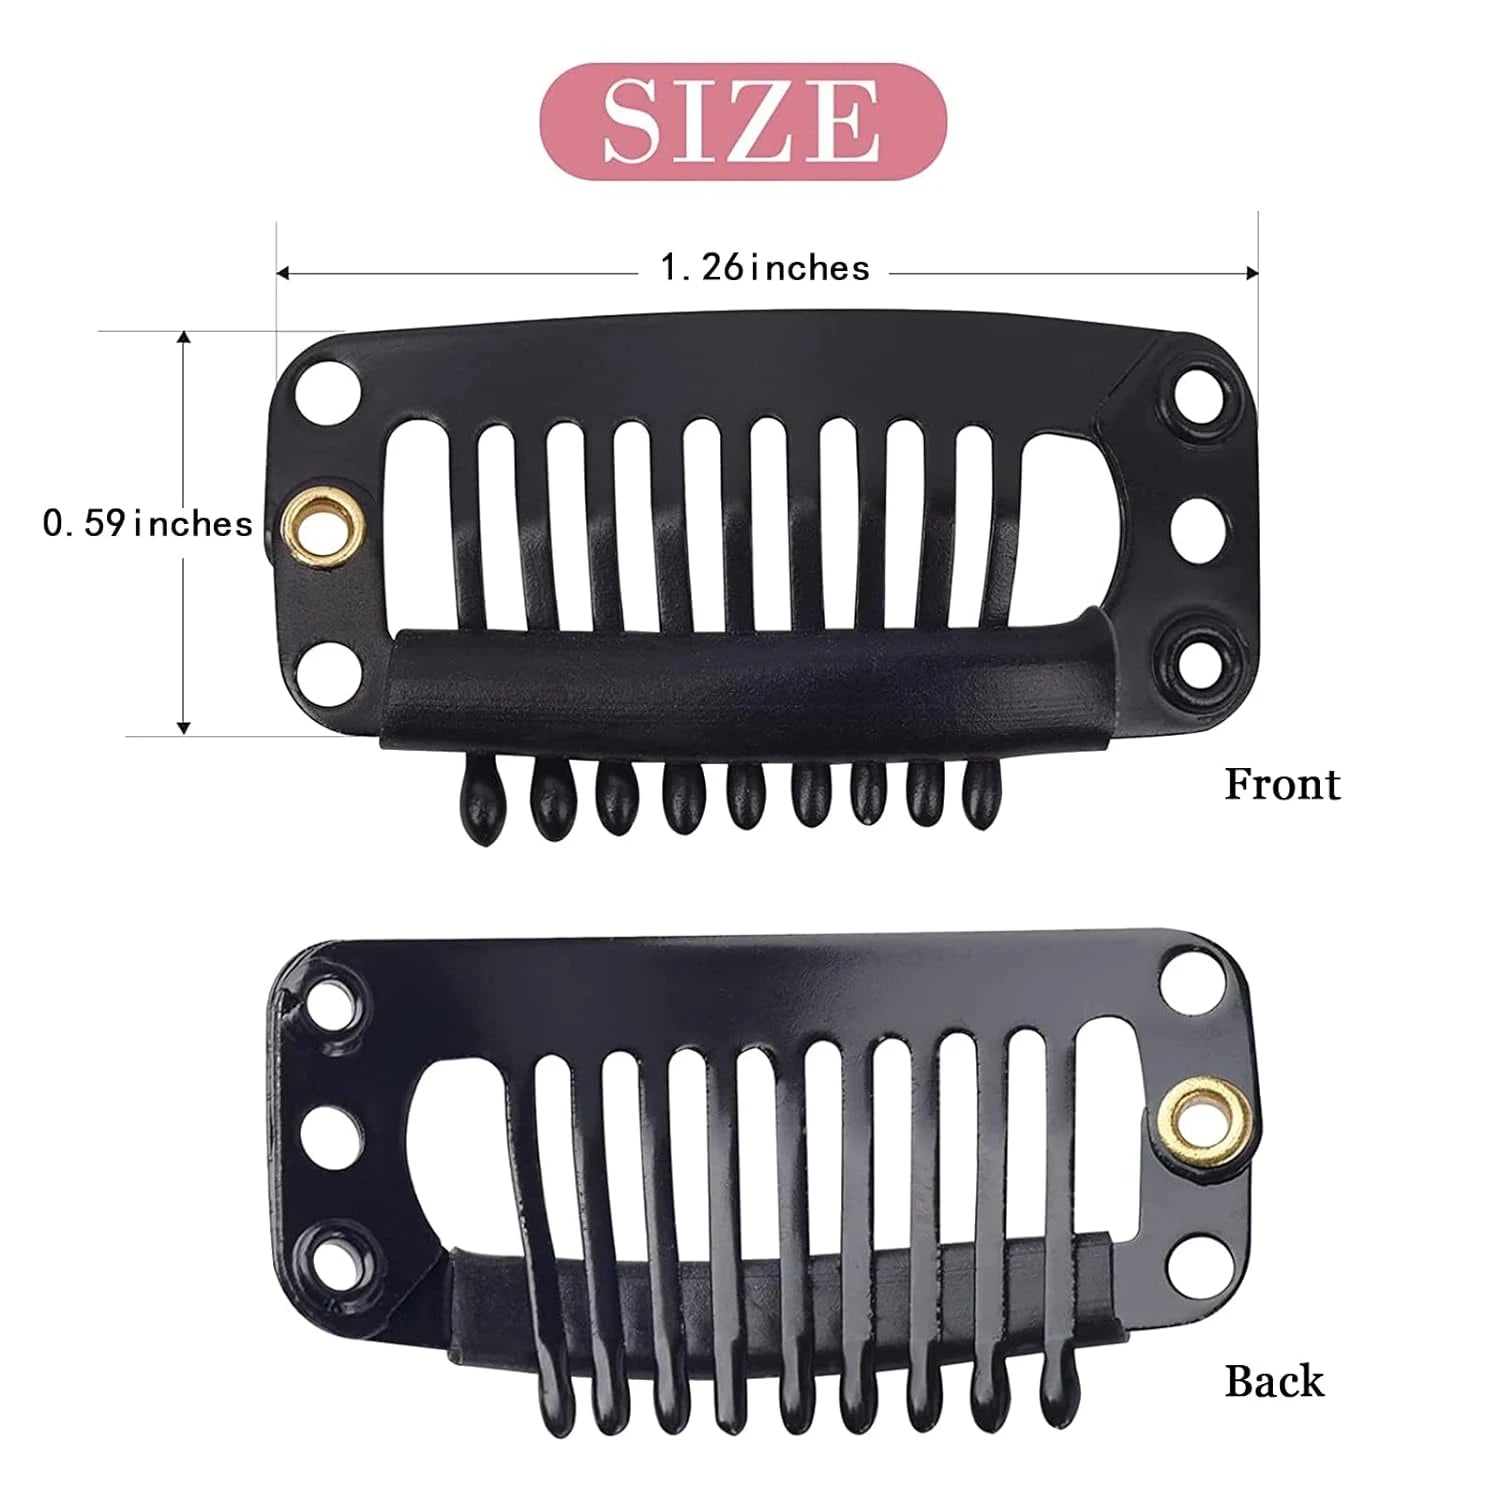 9-Teeth Metal Hair Clips for Effortless Styling: Premium Snap Comb Extensions